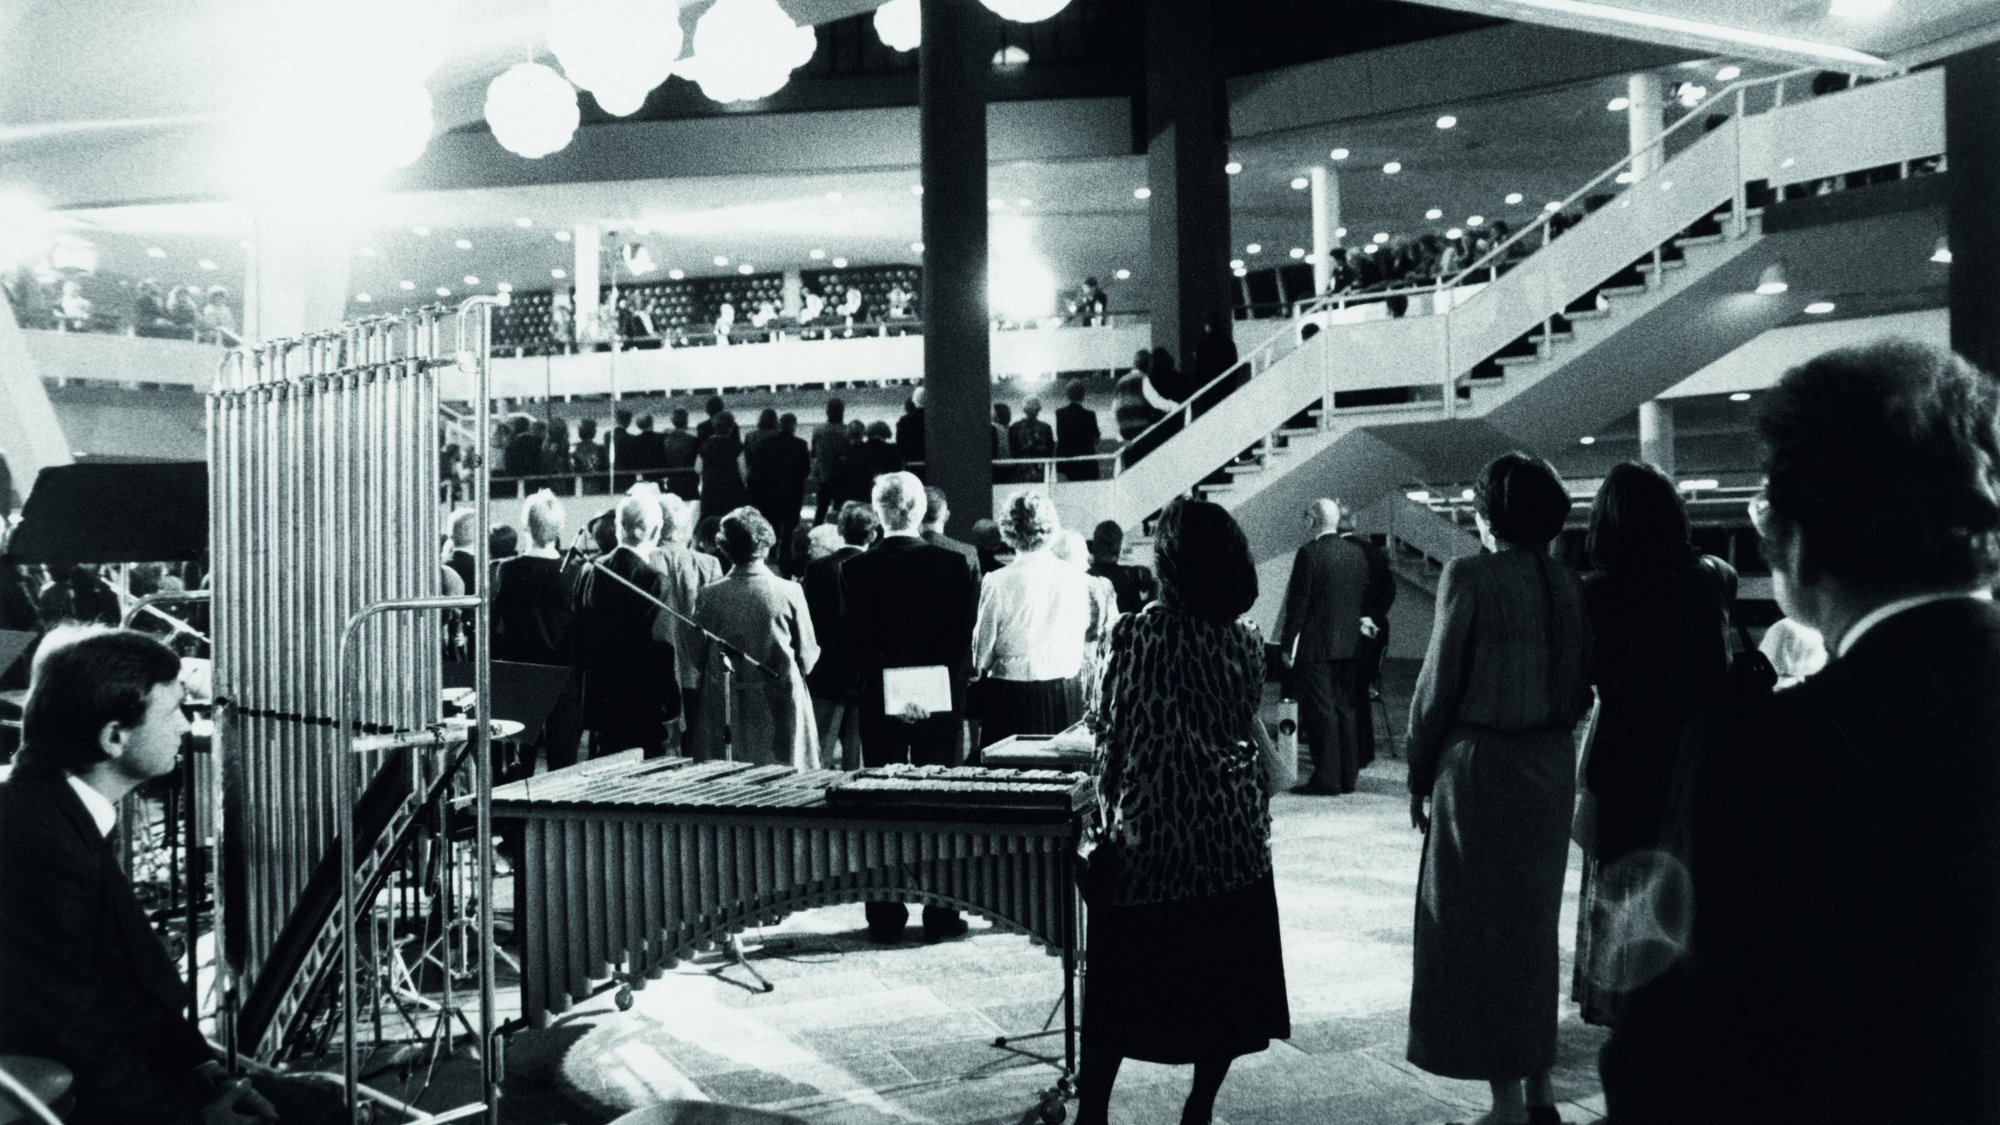 Black and white photo of the foyer of the Kammemusiksaal with guests and musical instruments